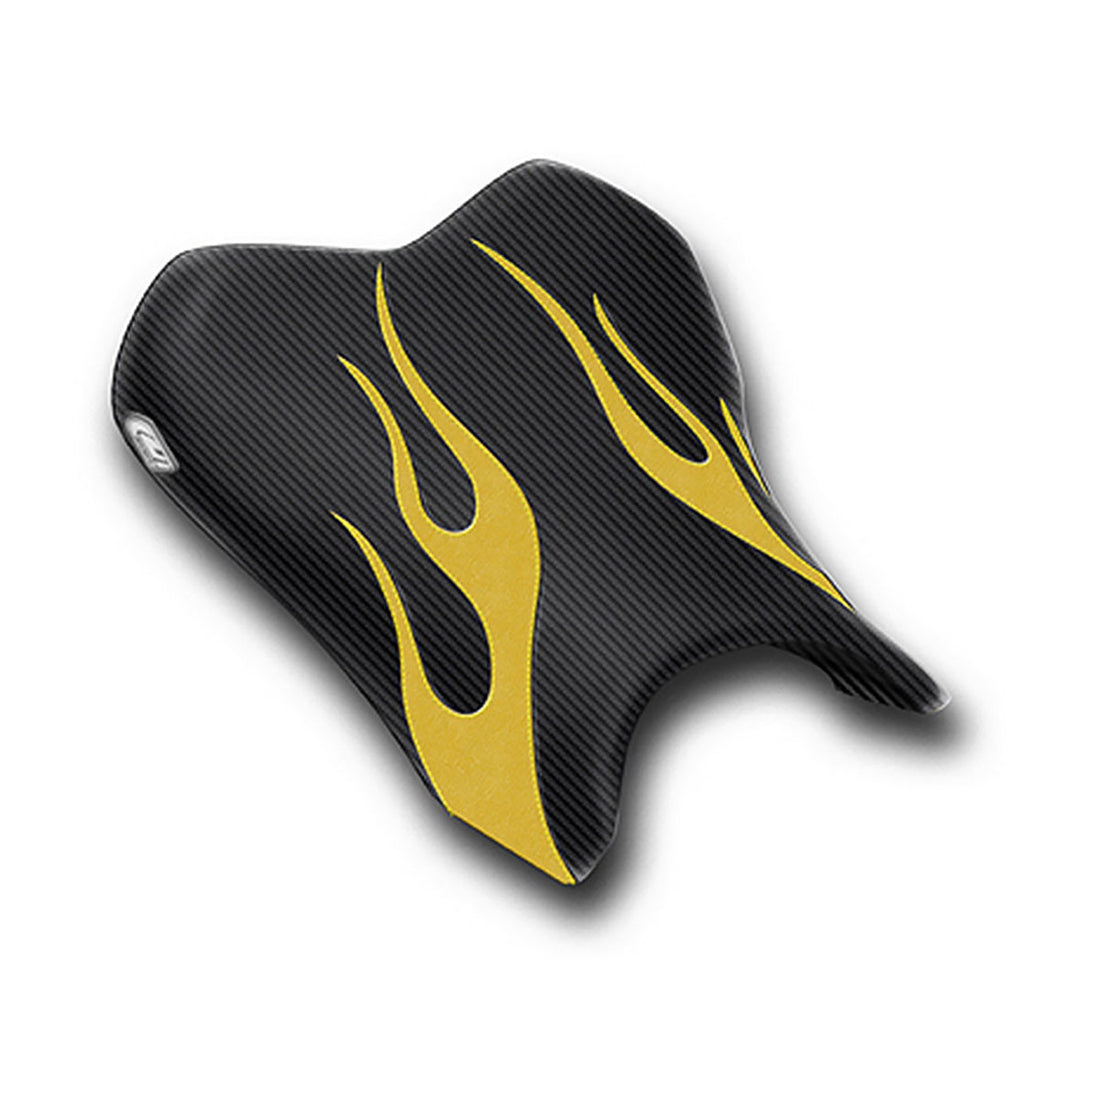 Yamaha | R6 06-07 | Flame | Rider Seat Cover